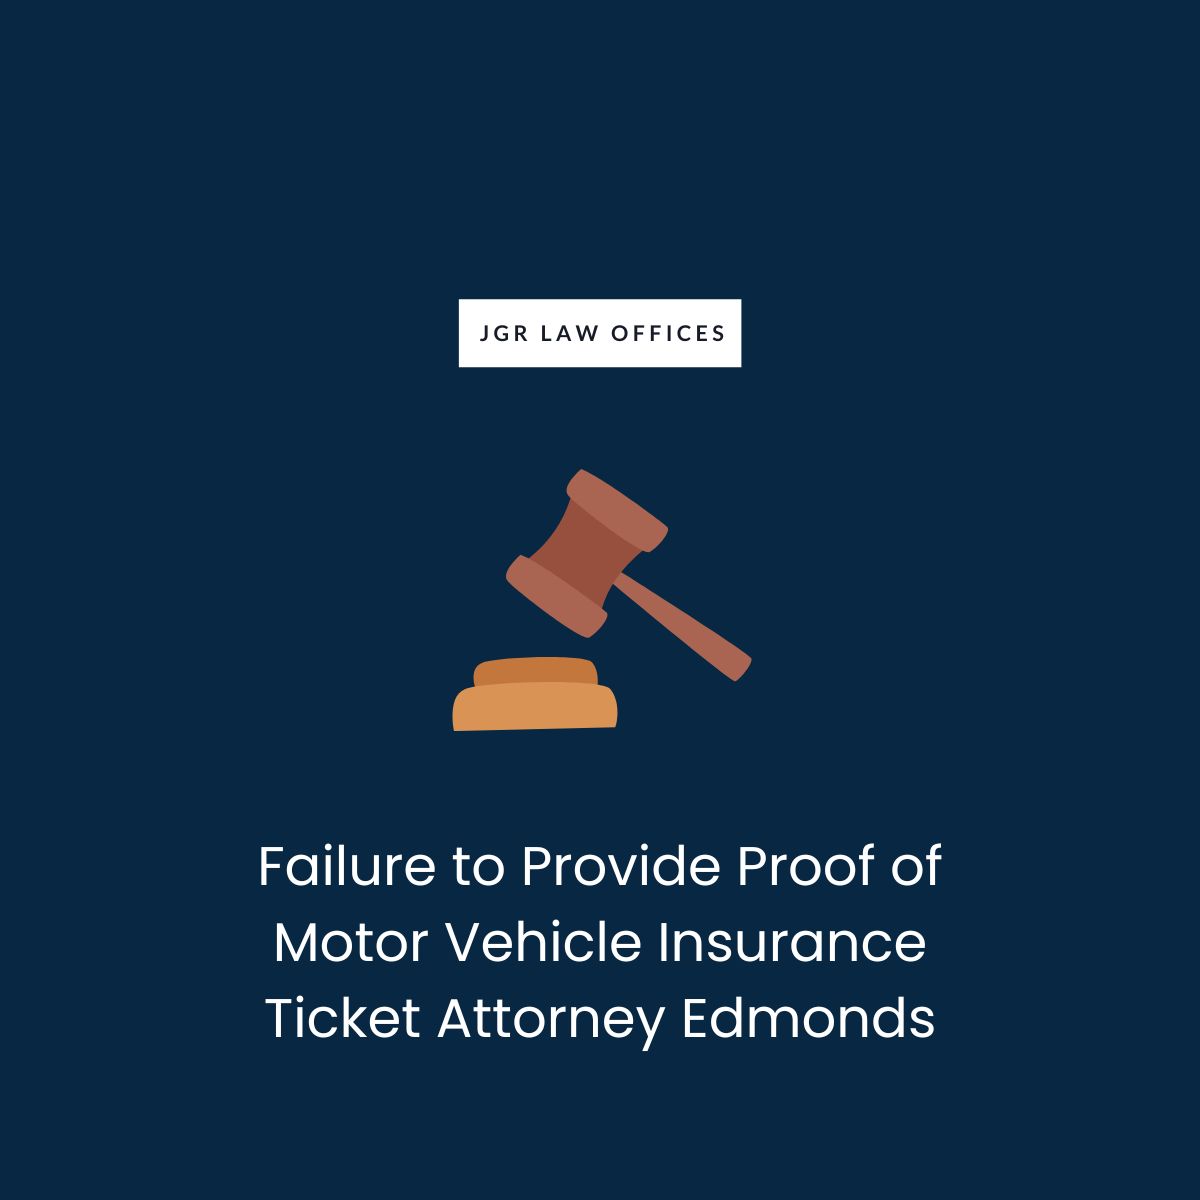 Failure to Provide Proof of Motor Vehicle Insurance Ticket Attorney Edmonds